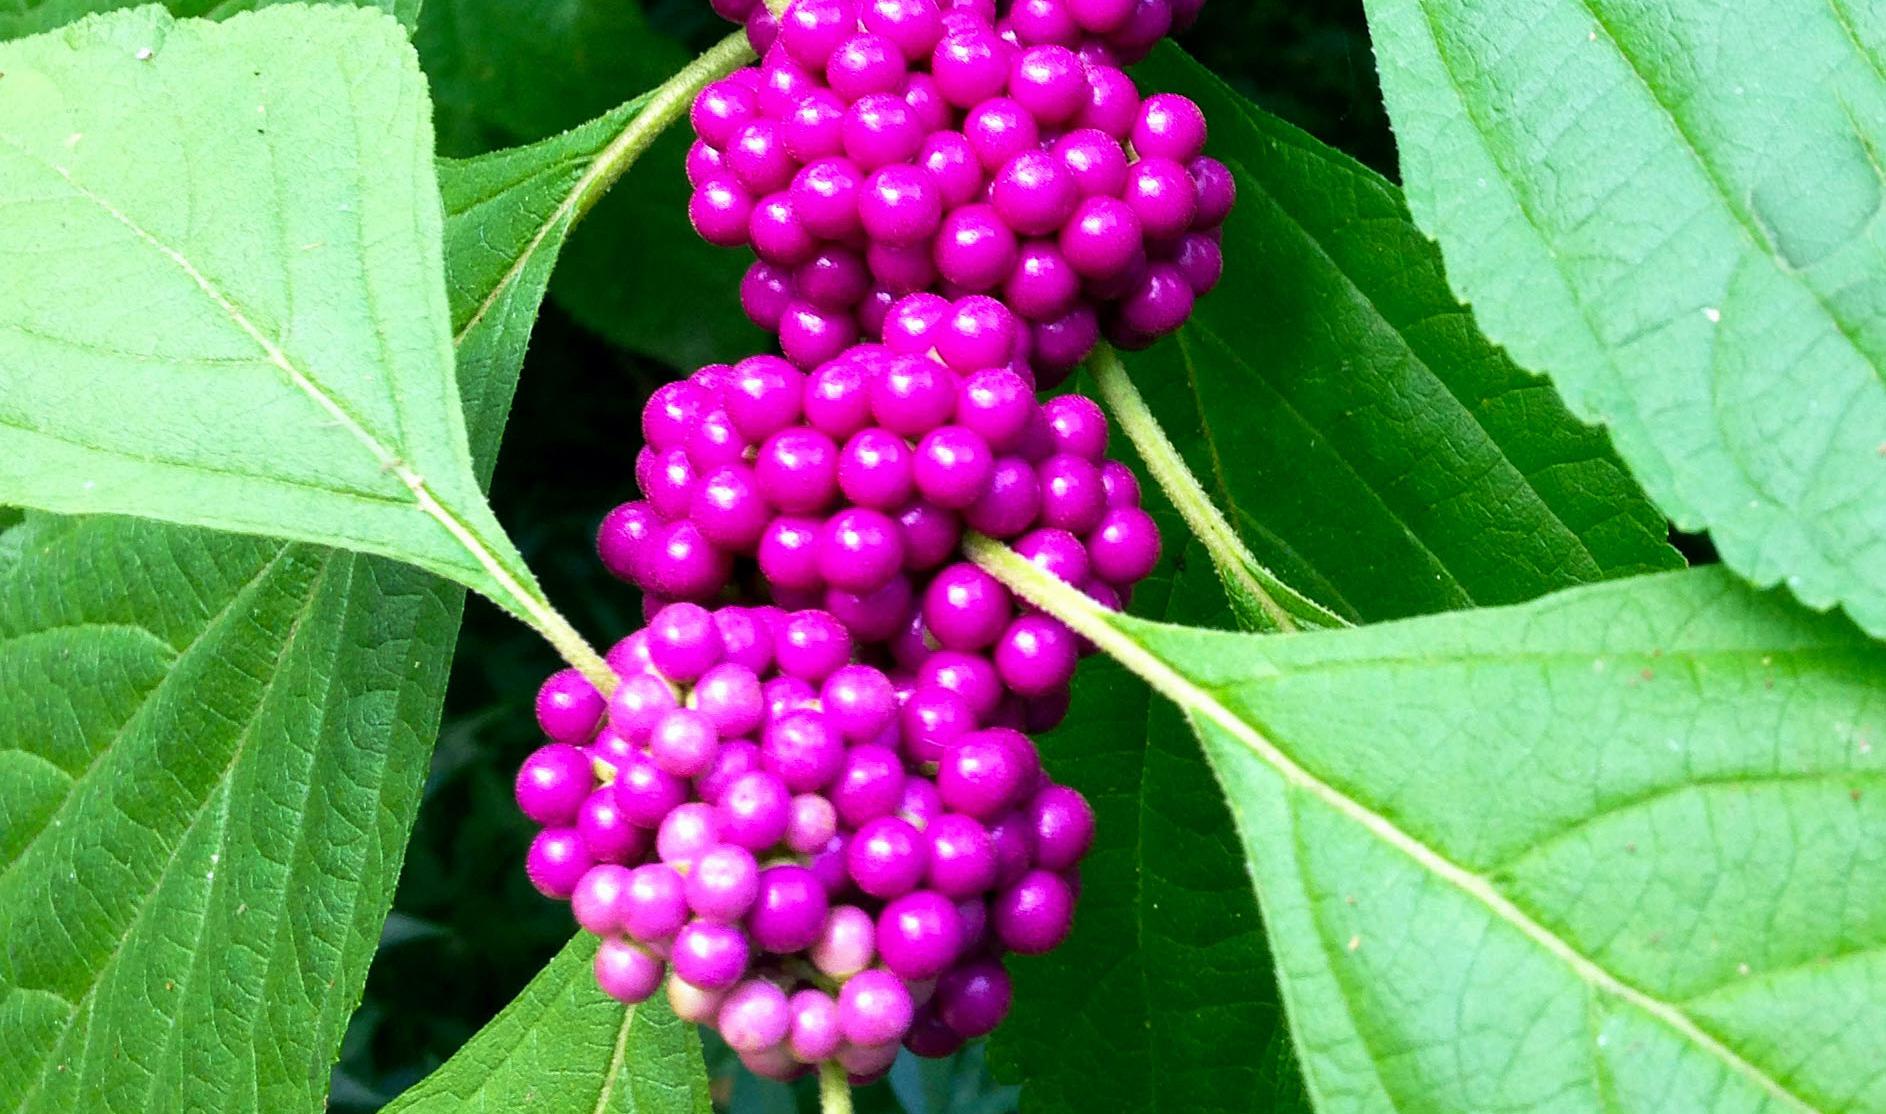 Neil Sperry American beautyberry is a jewel among native Texas shrubs